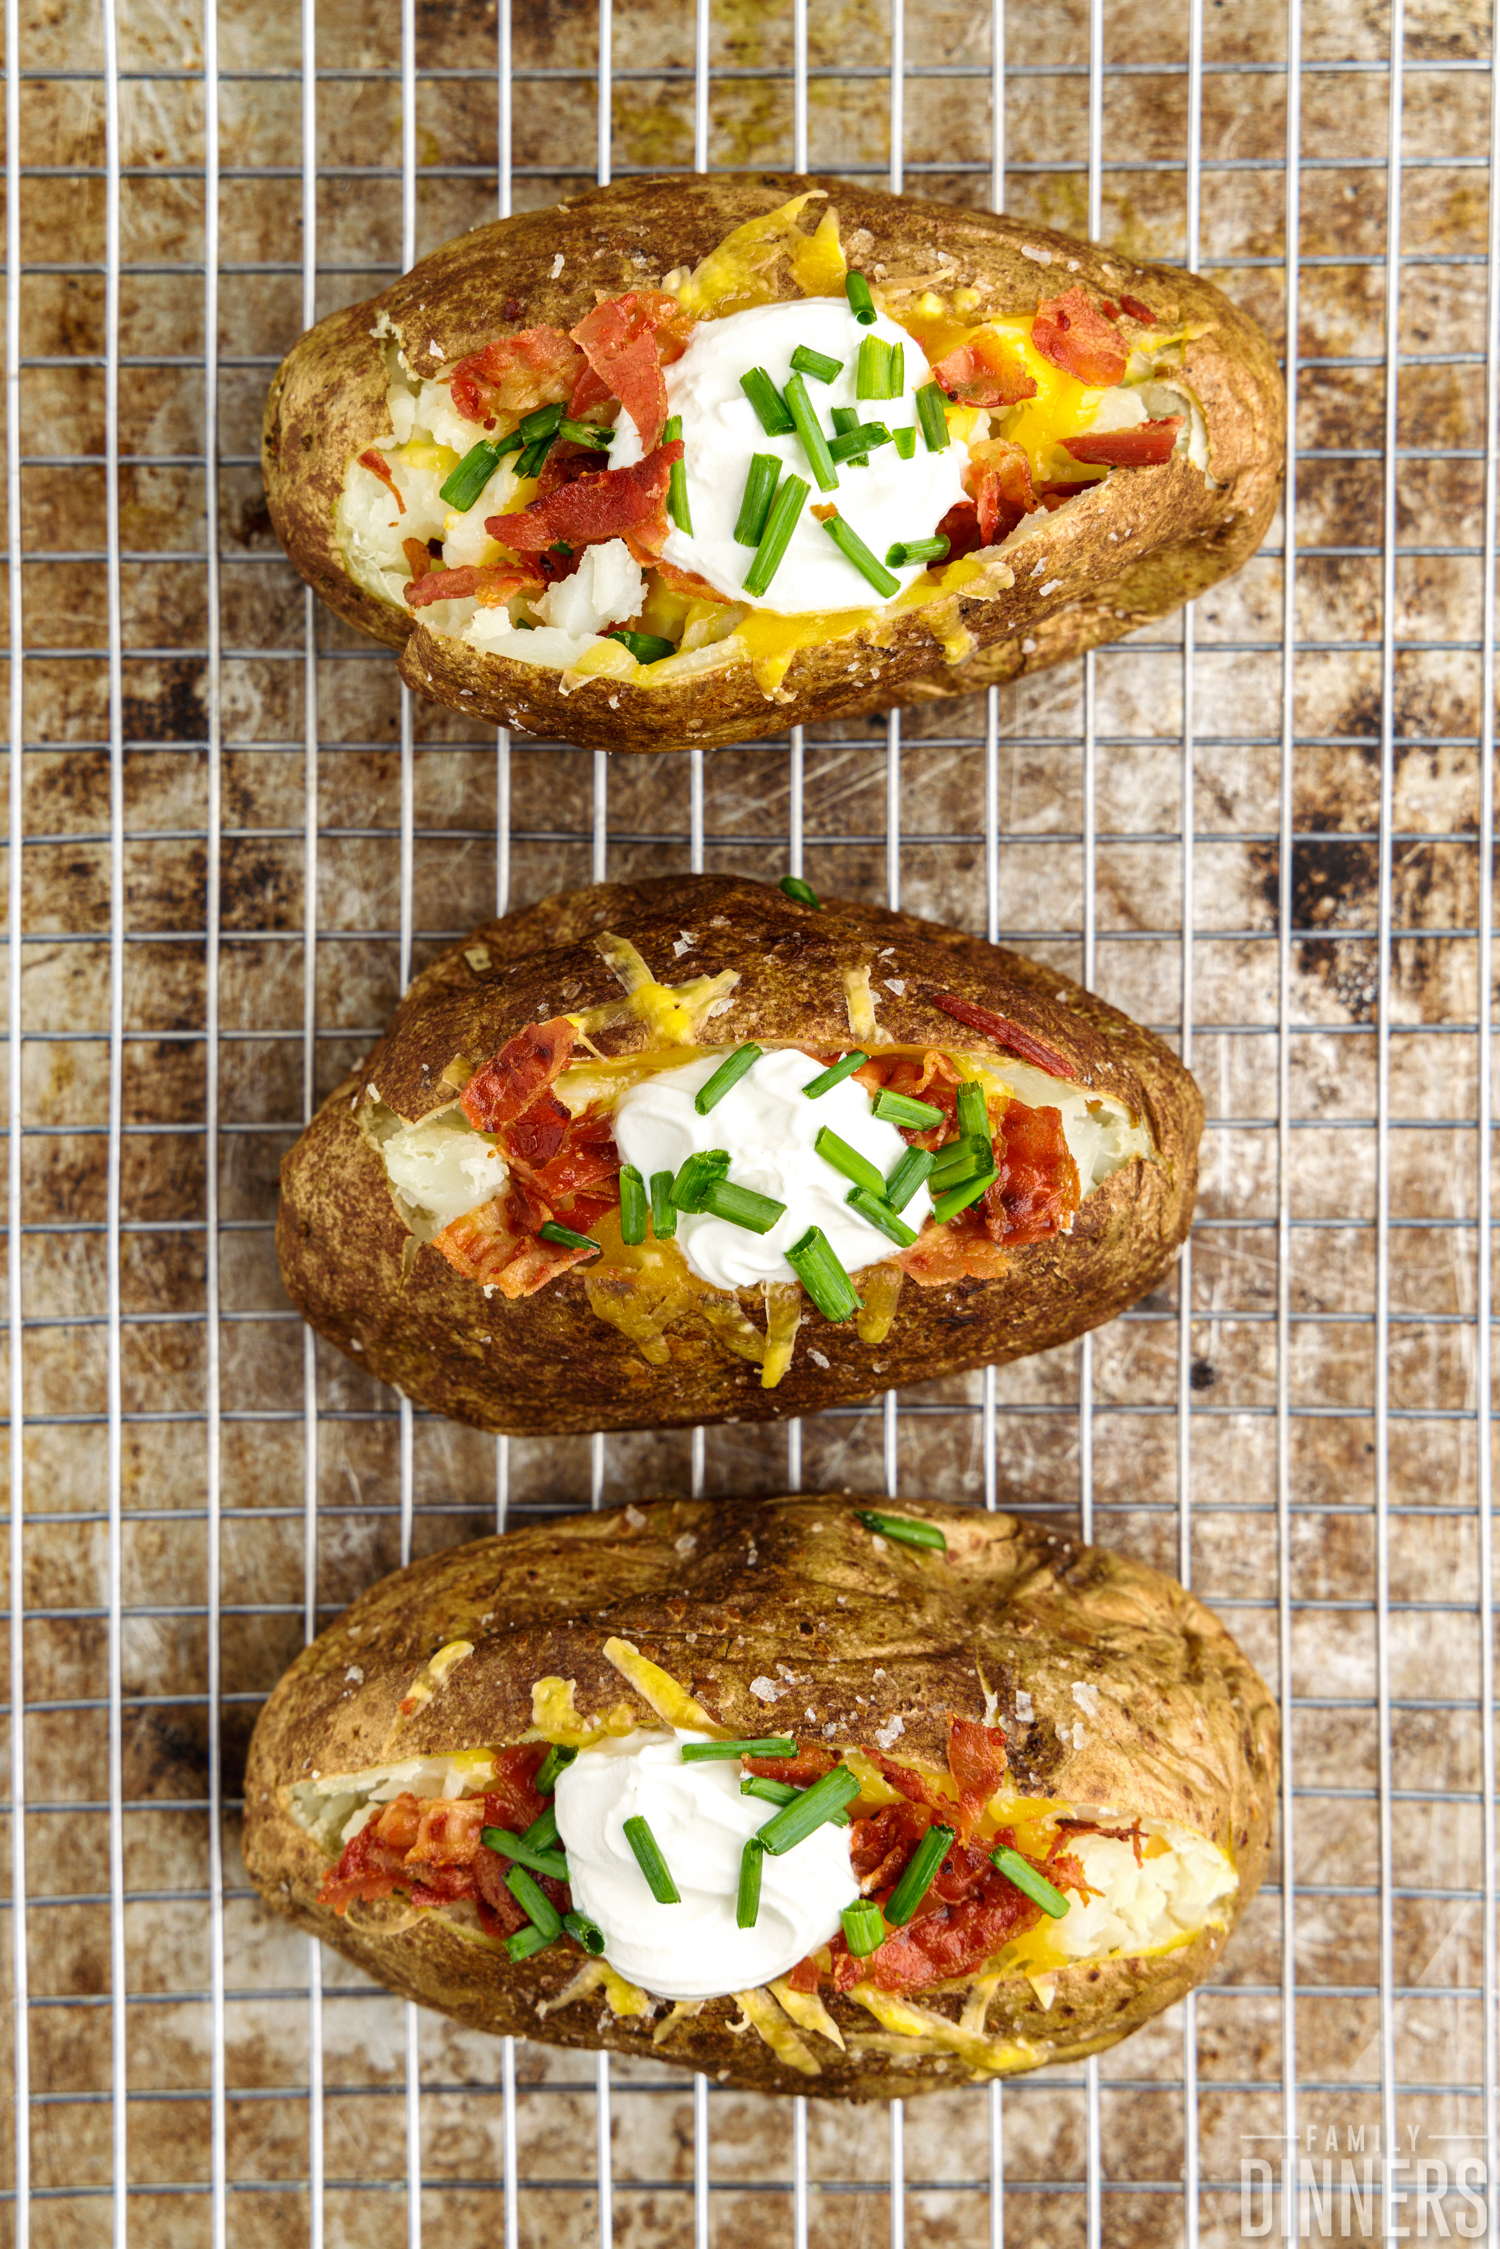 Fully cooked, loaded baked potatoes on a wire rack. Potatoes are filled with melted cheddar cheese, bacon bits, sour cream and green onions.